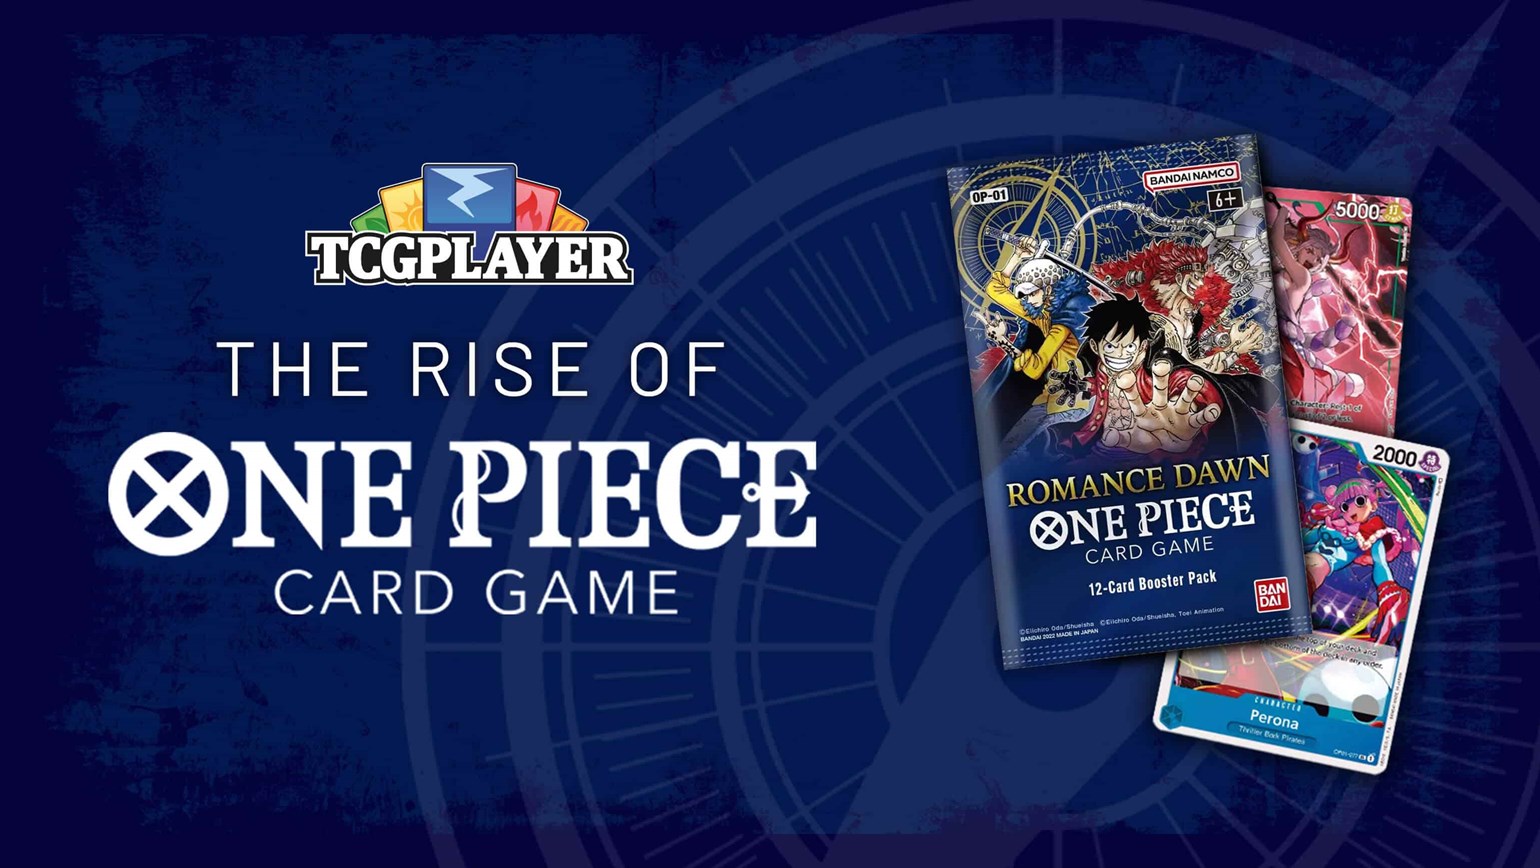 The One Piece card game just outsold every other TCG